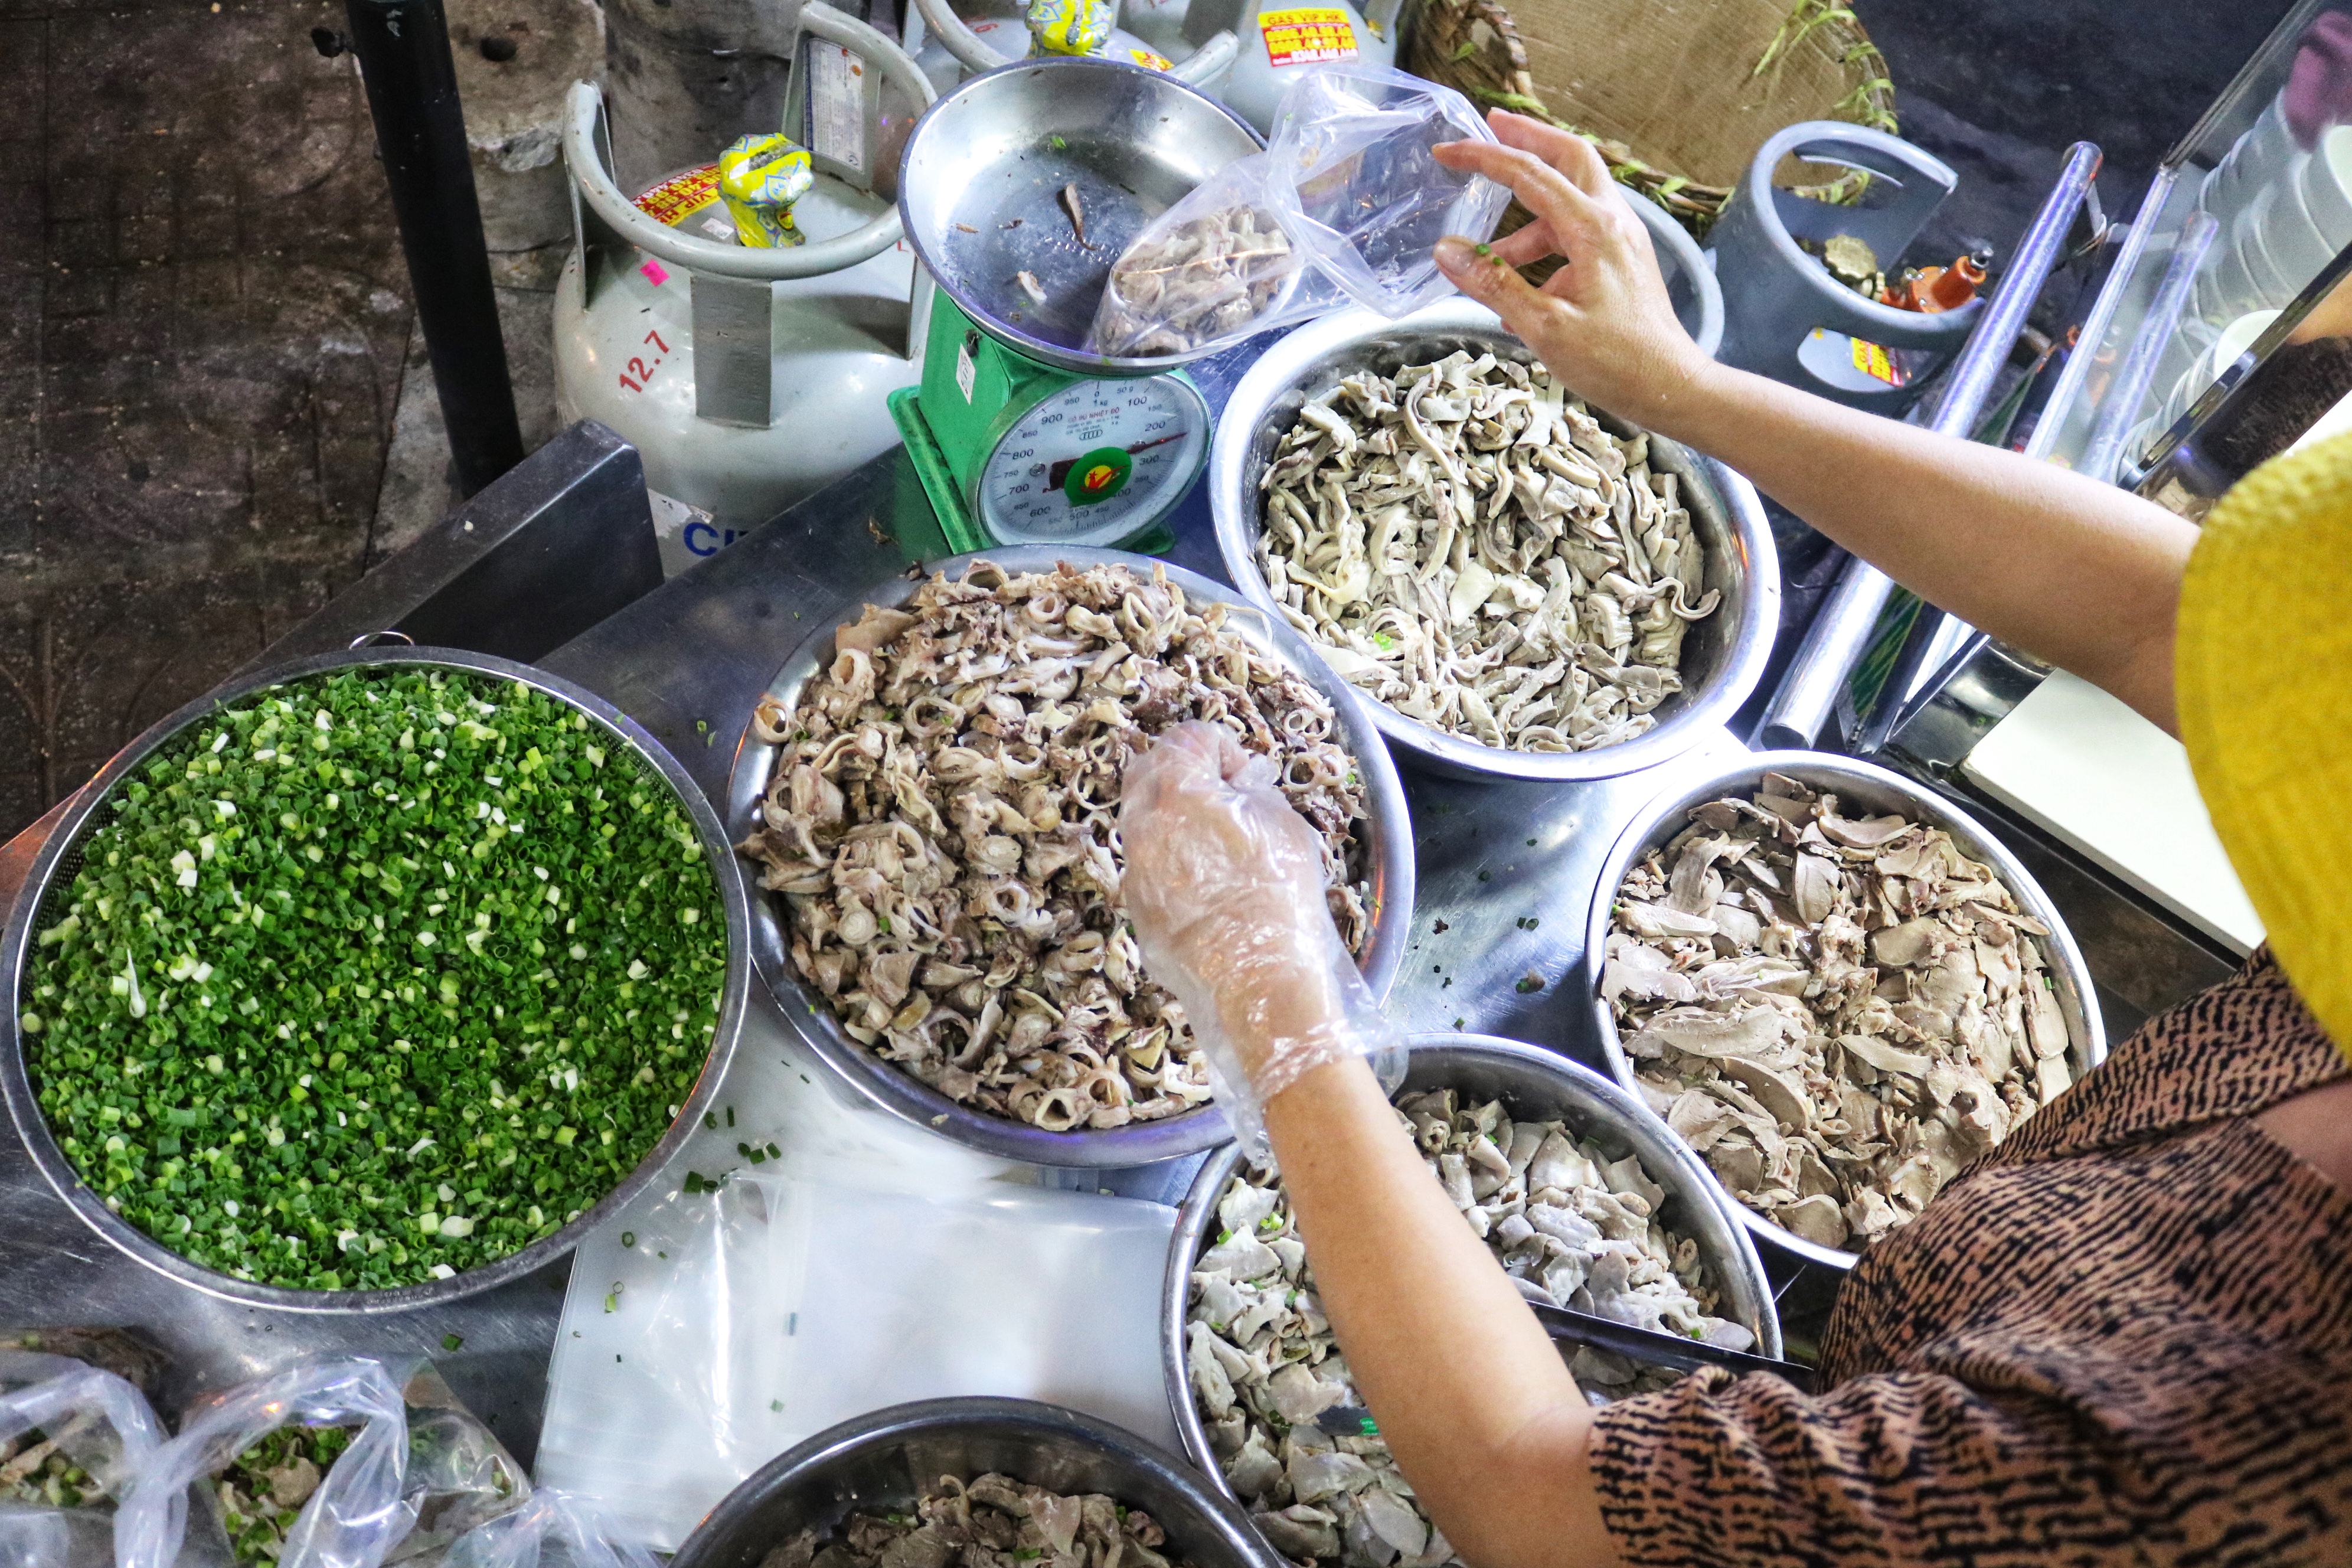 Ingredients for huyet chung at Hoa’s stall on Pham Van Hai Street in Tan Binh District, Ho Chi Minh City. Photo: Hoang An / Tuoi Tre News